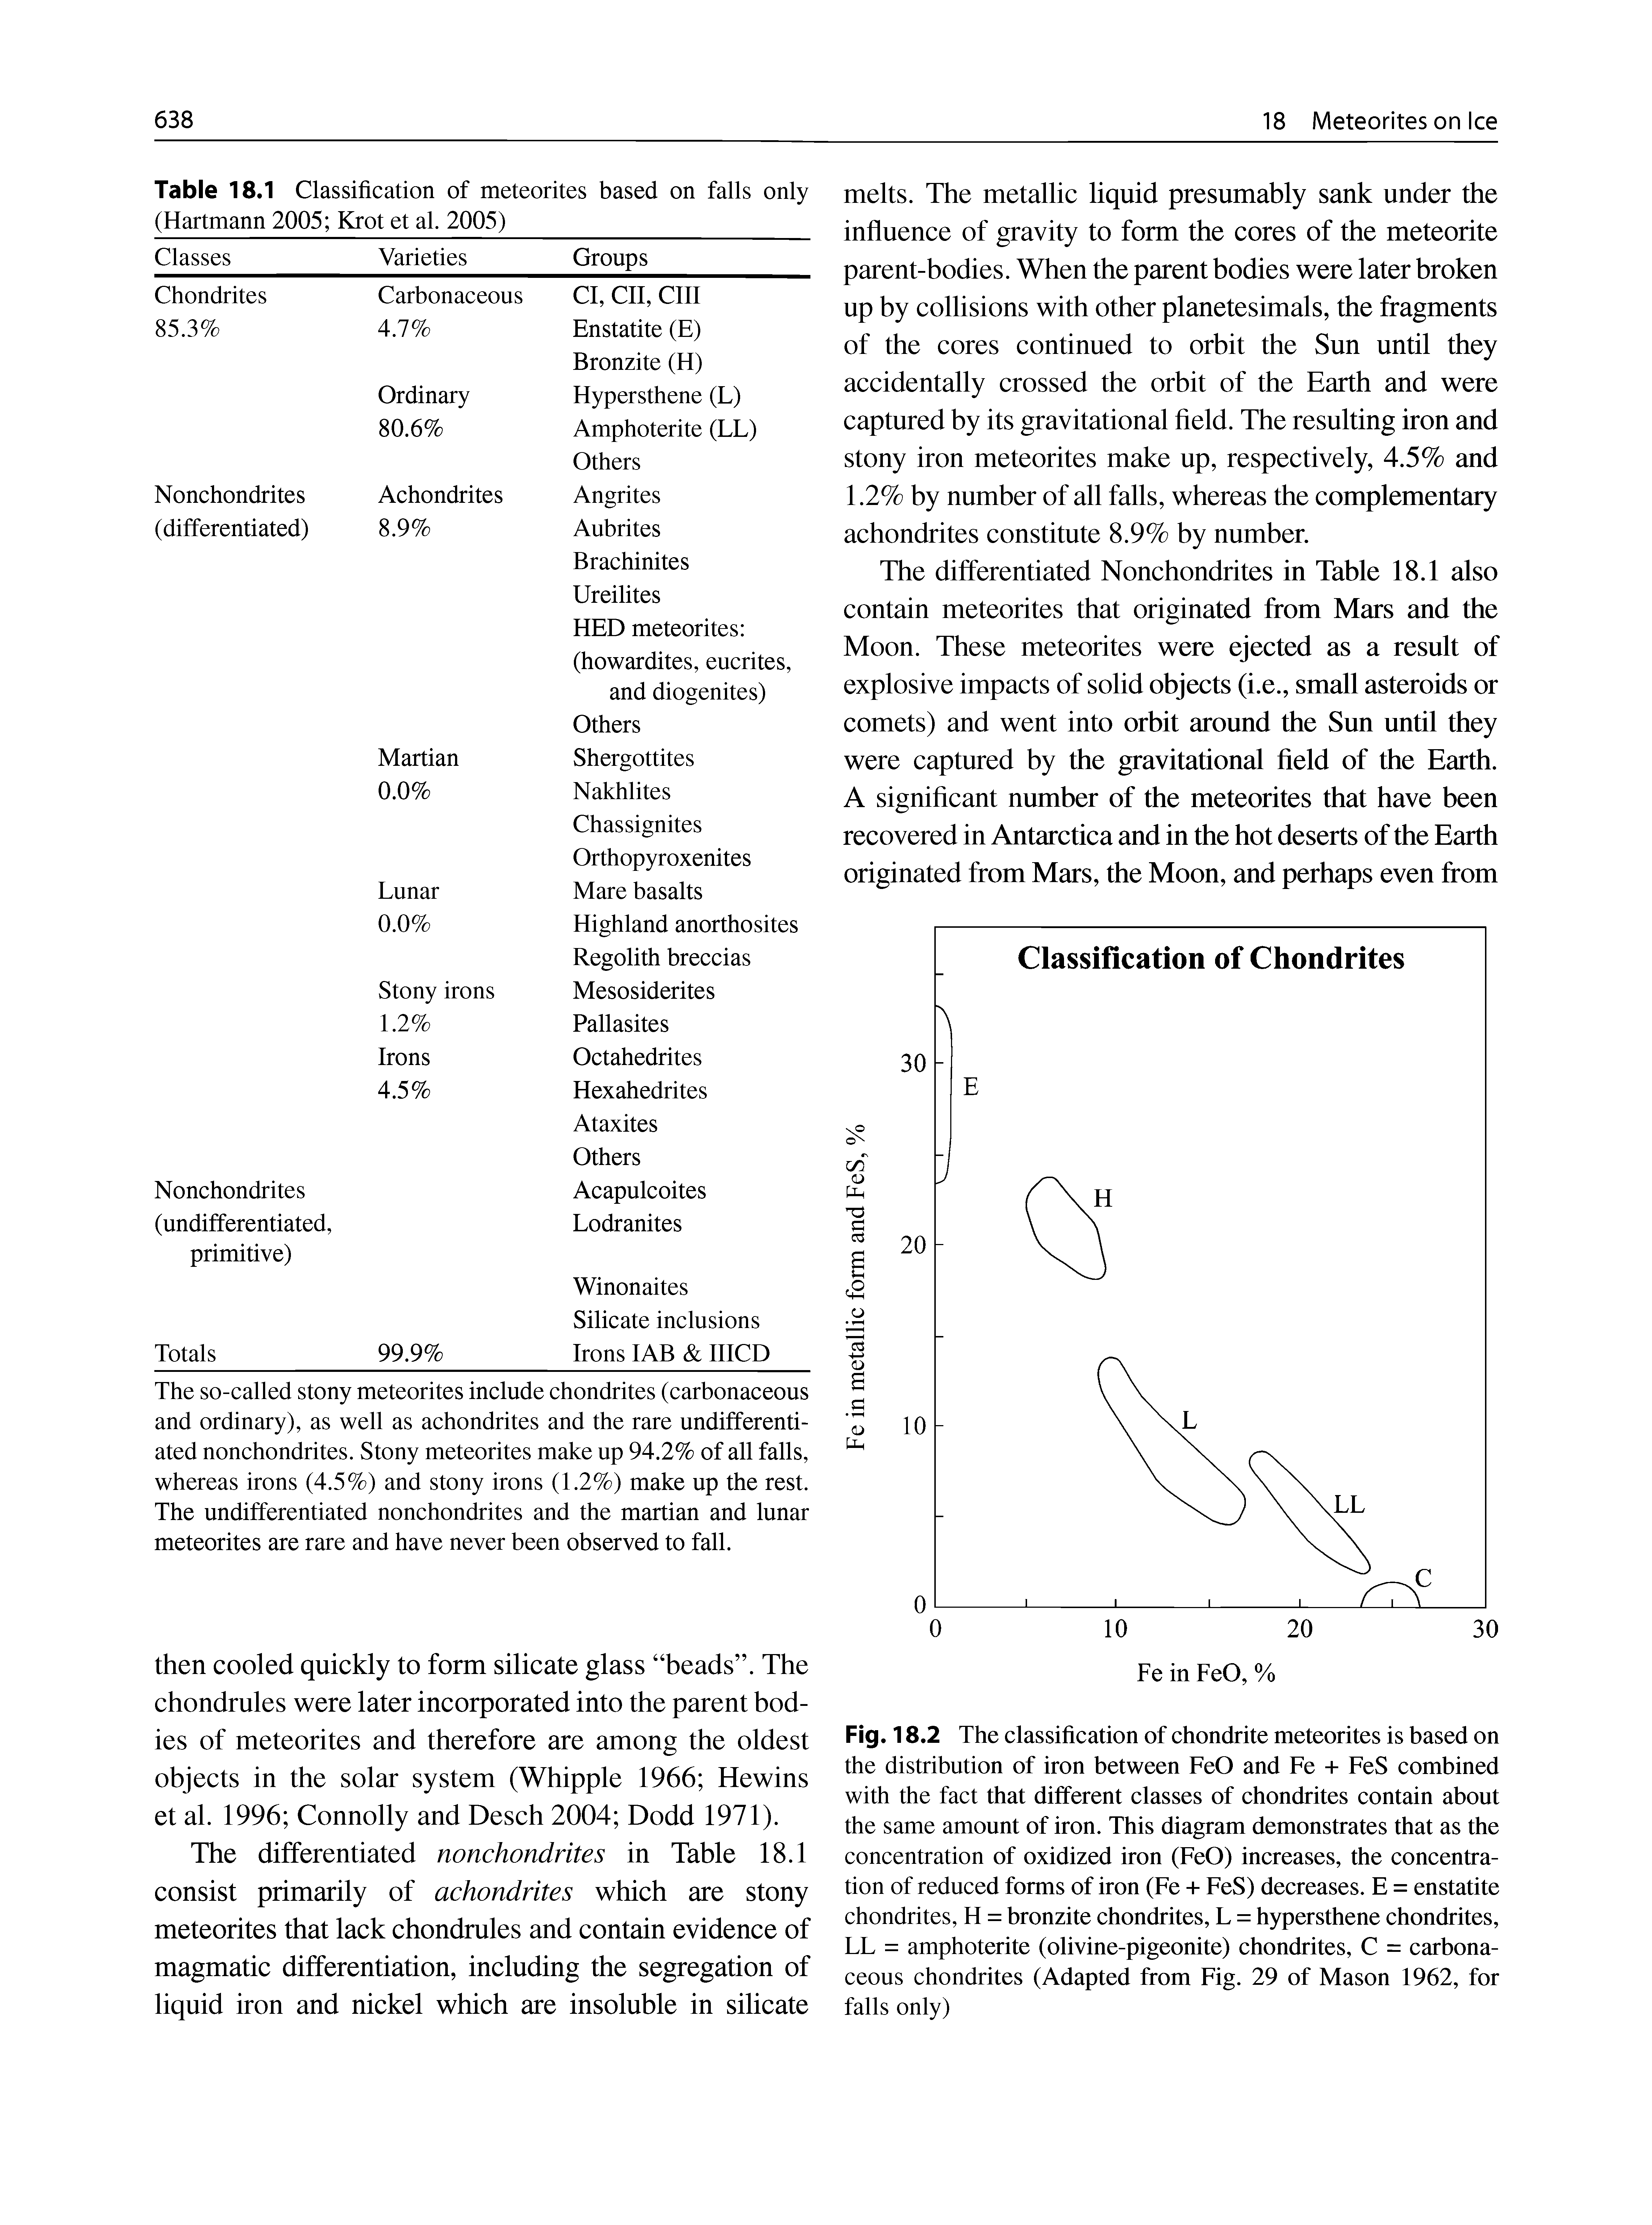 Fig. 18.2 The classification of chondrite meteorites is based on the distribution of iron between FeO and Fe + FeS combined with the fact that different classes of chondrites contain about the same amount of iron. This diagram demonstrates that as the concentration of oxidized iron (FeO) increases, the concentration of reduced forms of iron (Fe + FeS) decreases. E = enstatite chondrites, H = bronzite ehondrites, L = hypersthene chondrites, LL = amphoterite (olivine-pigeonite) chondrites, C = carbonaceous chondrites (Adapted from Fig. 29 of Mason 1962, for falls only)...